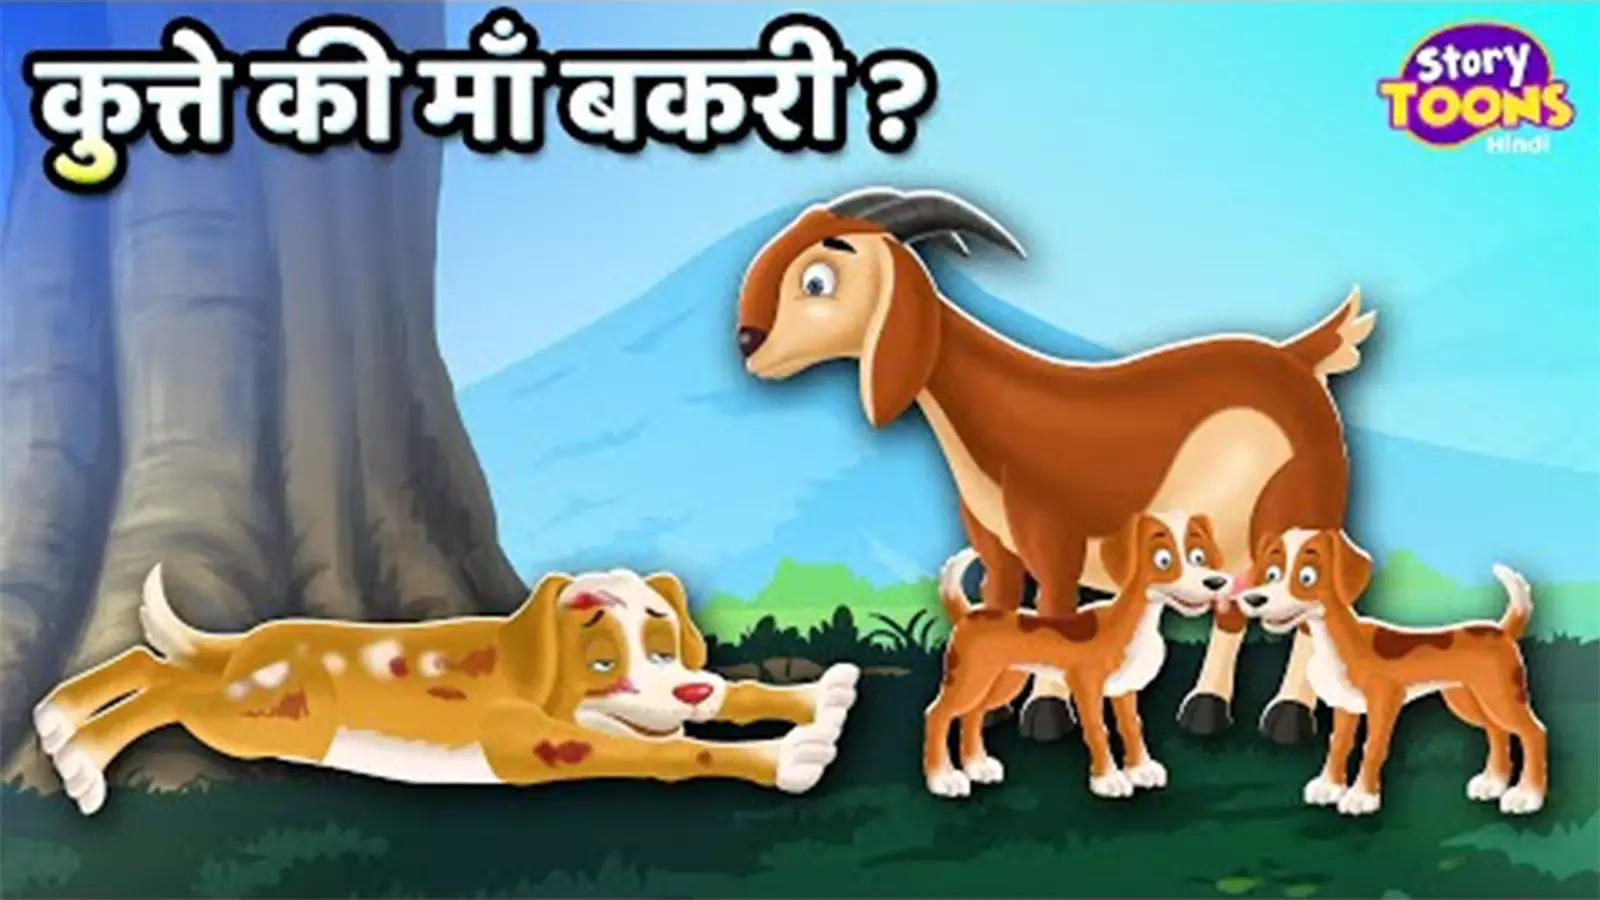 Watch Latest Children Hindi Story 'Dog's Mother Goat' For Kids - Check Out  Kids Nursery Rhymes And Baby Songs In Hindi | Entertainment - Times of  India Videos